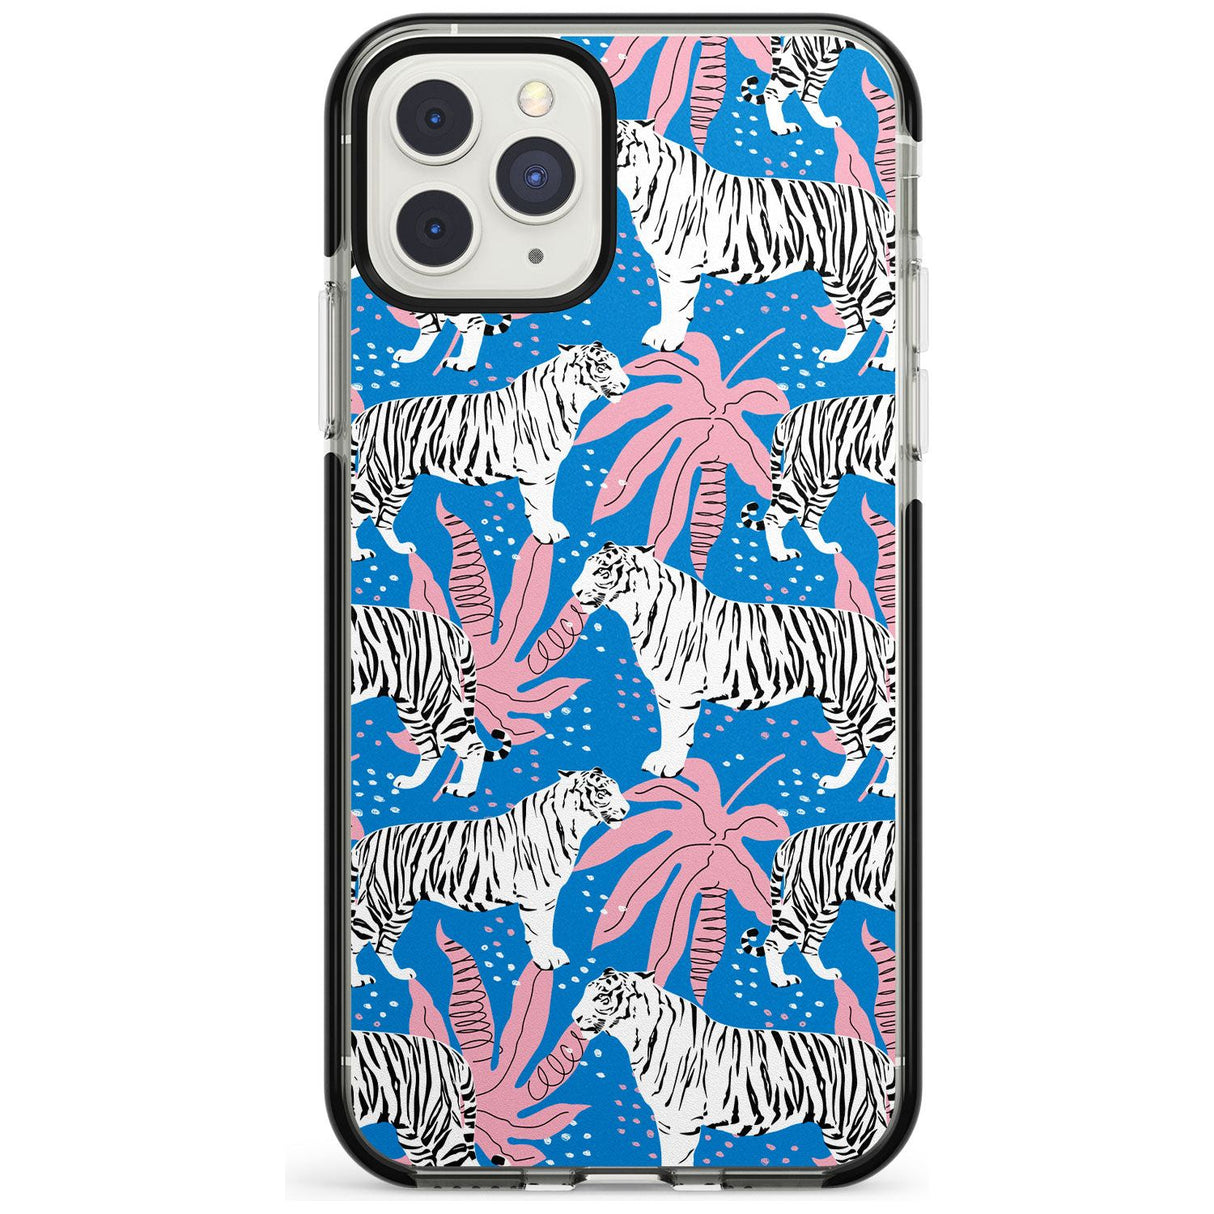 Bengal Blues Black Impact Phone Case for iPhone 11 Pro Max